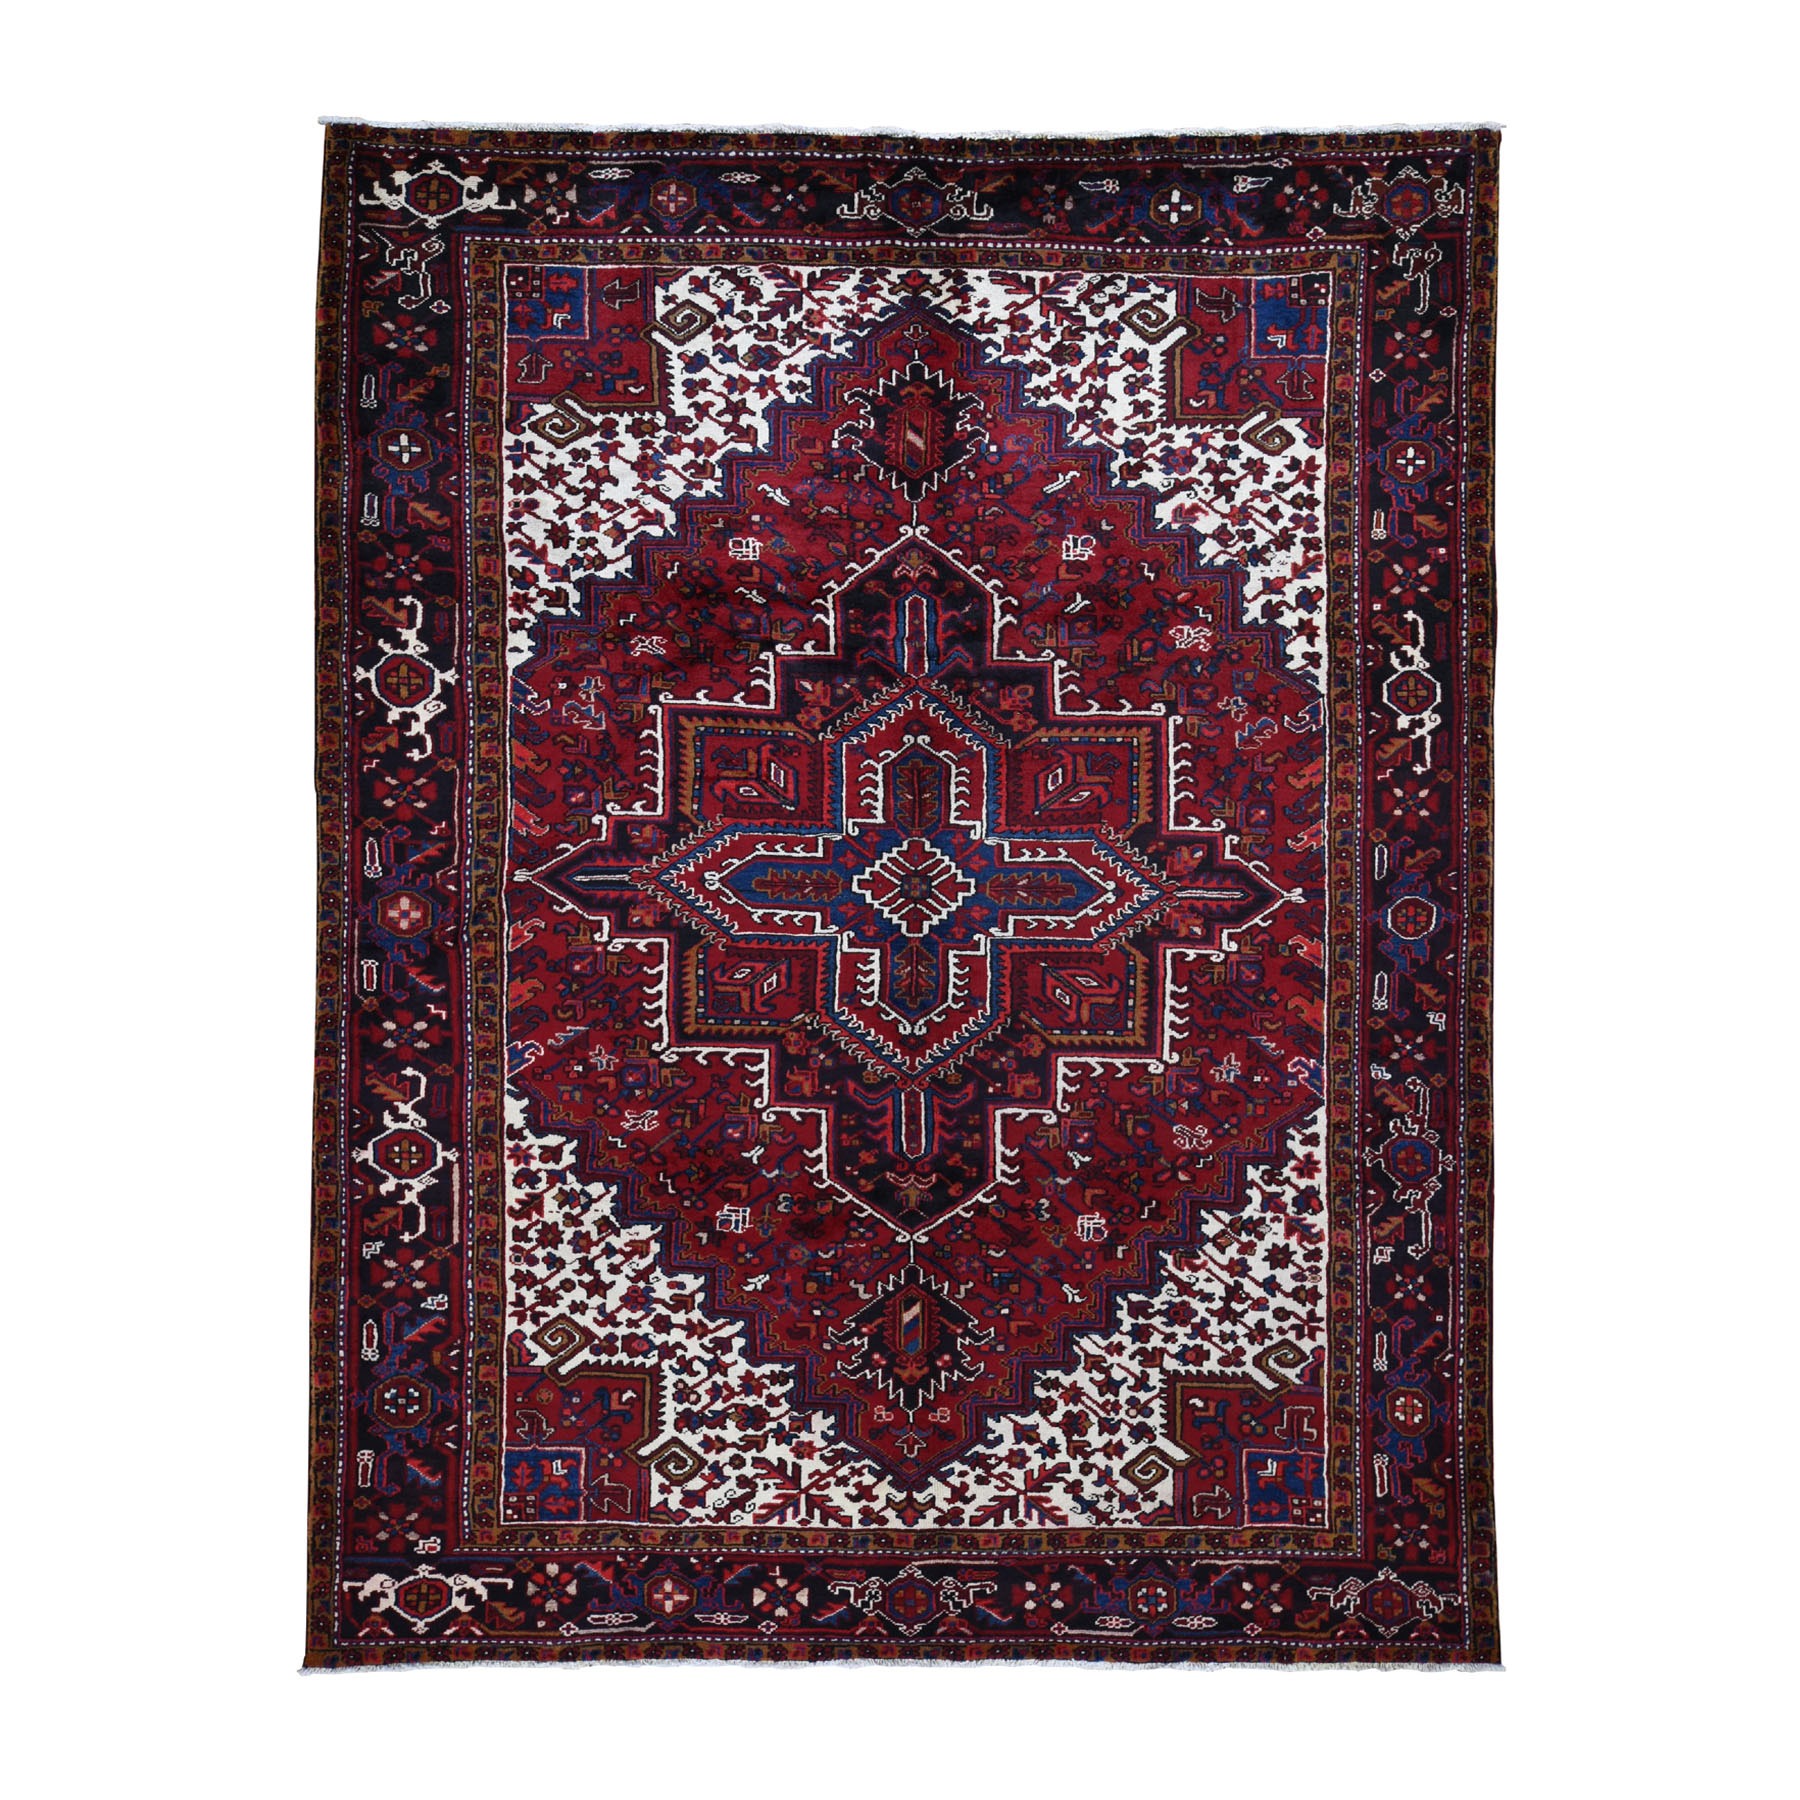 8'X10'10" Red Semi Antique Persian Heriz Geometric Design Thick And Plush Hand Knotted Oriental Rug moad8cb9